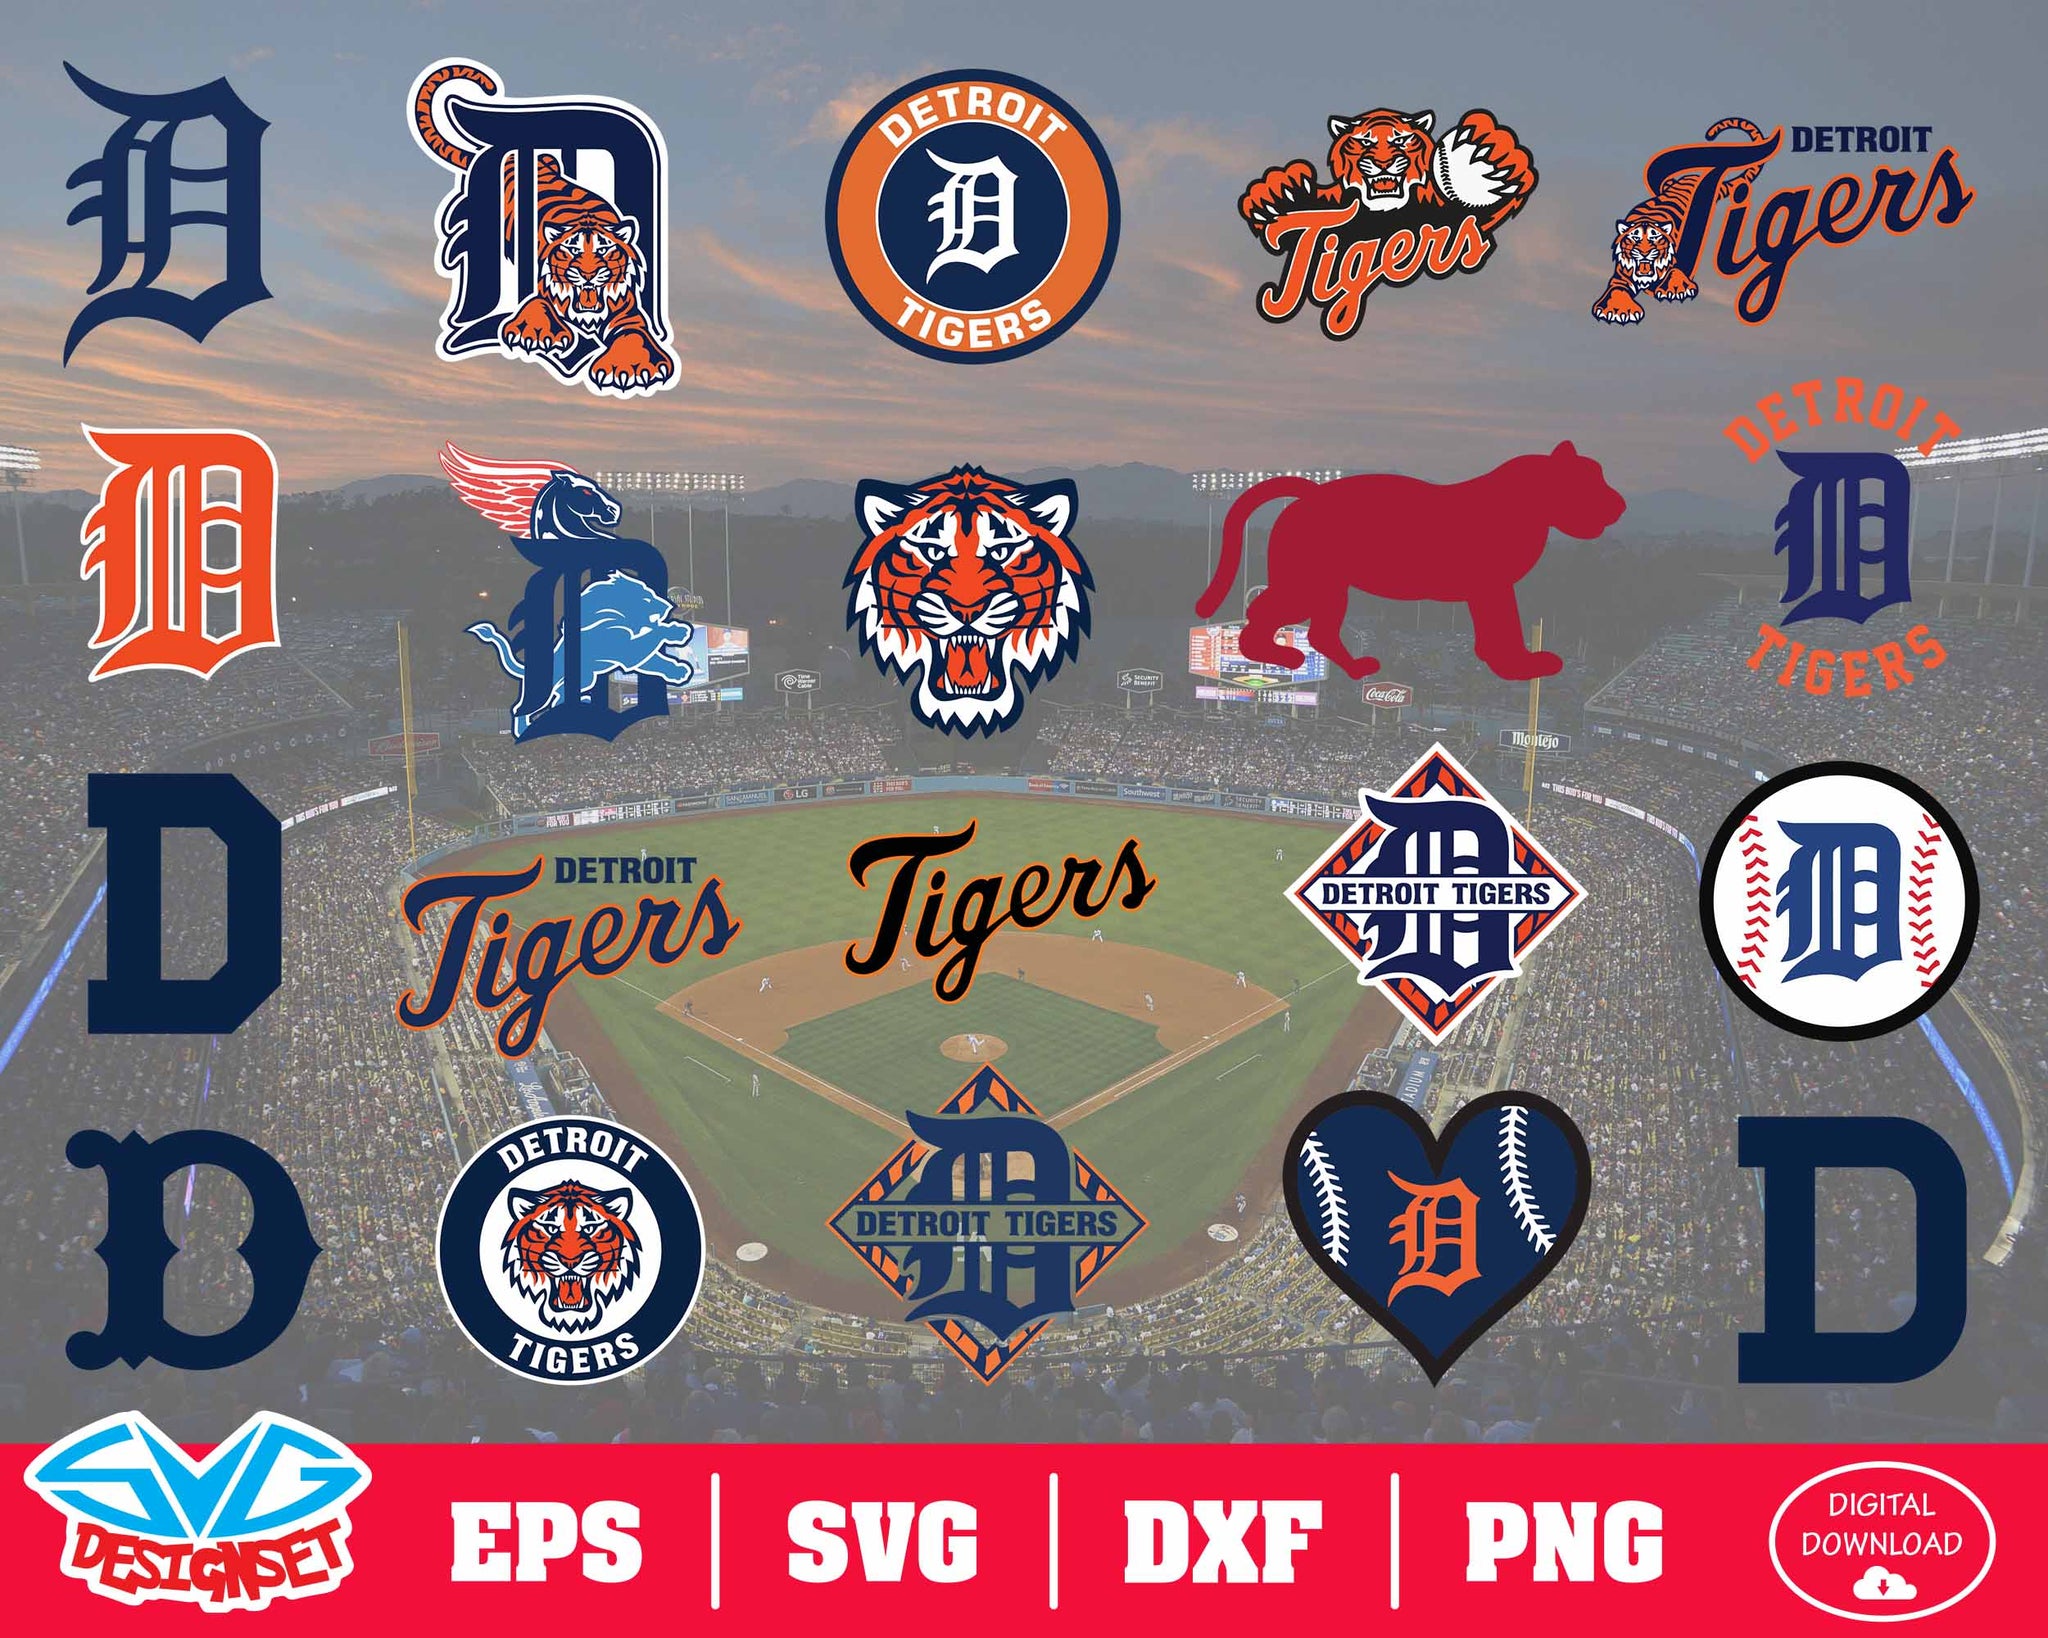 Detroit Tigers Team Svg, Dxf, Eps, Png, Clipart, Silhouette and Cutfiles - SVGDesignSets